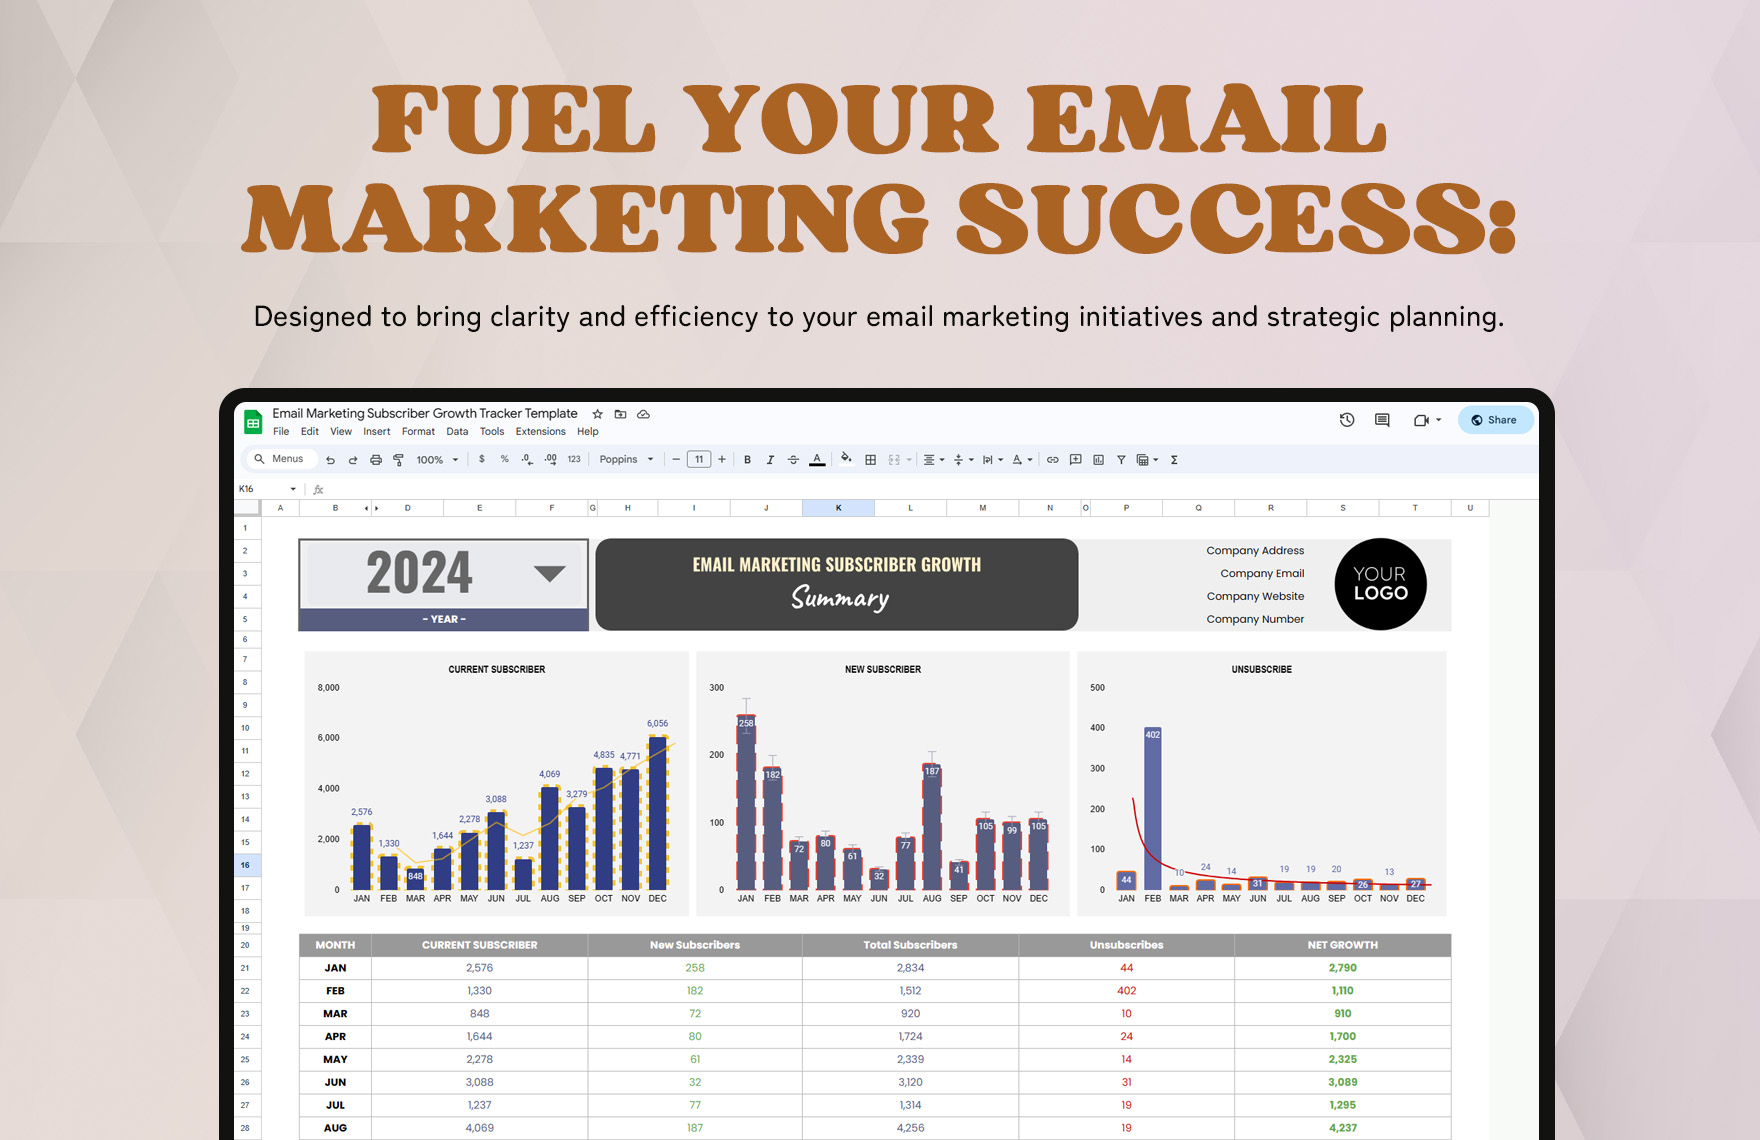 Email Marketing Subscriber Growth Tracker Template